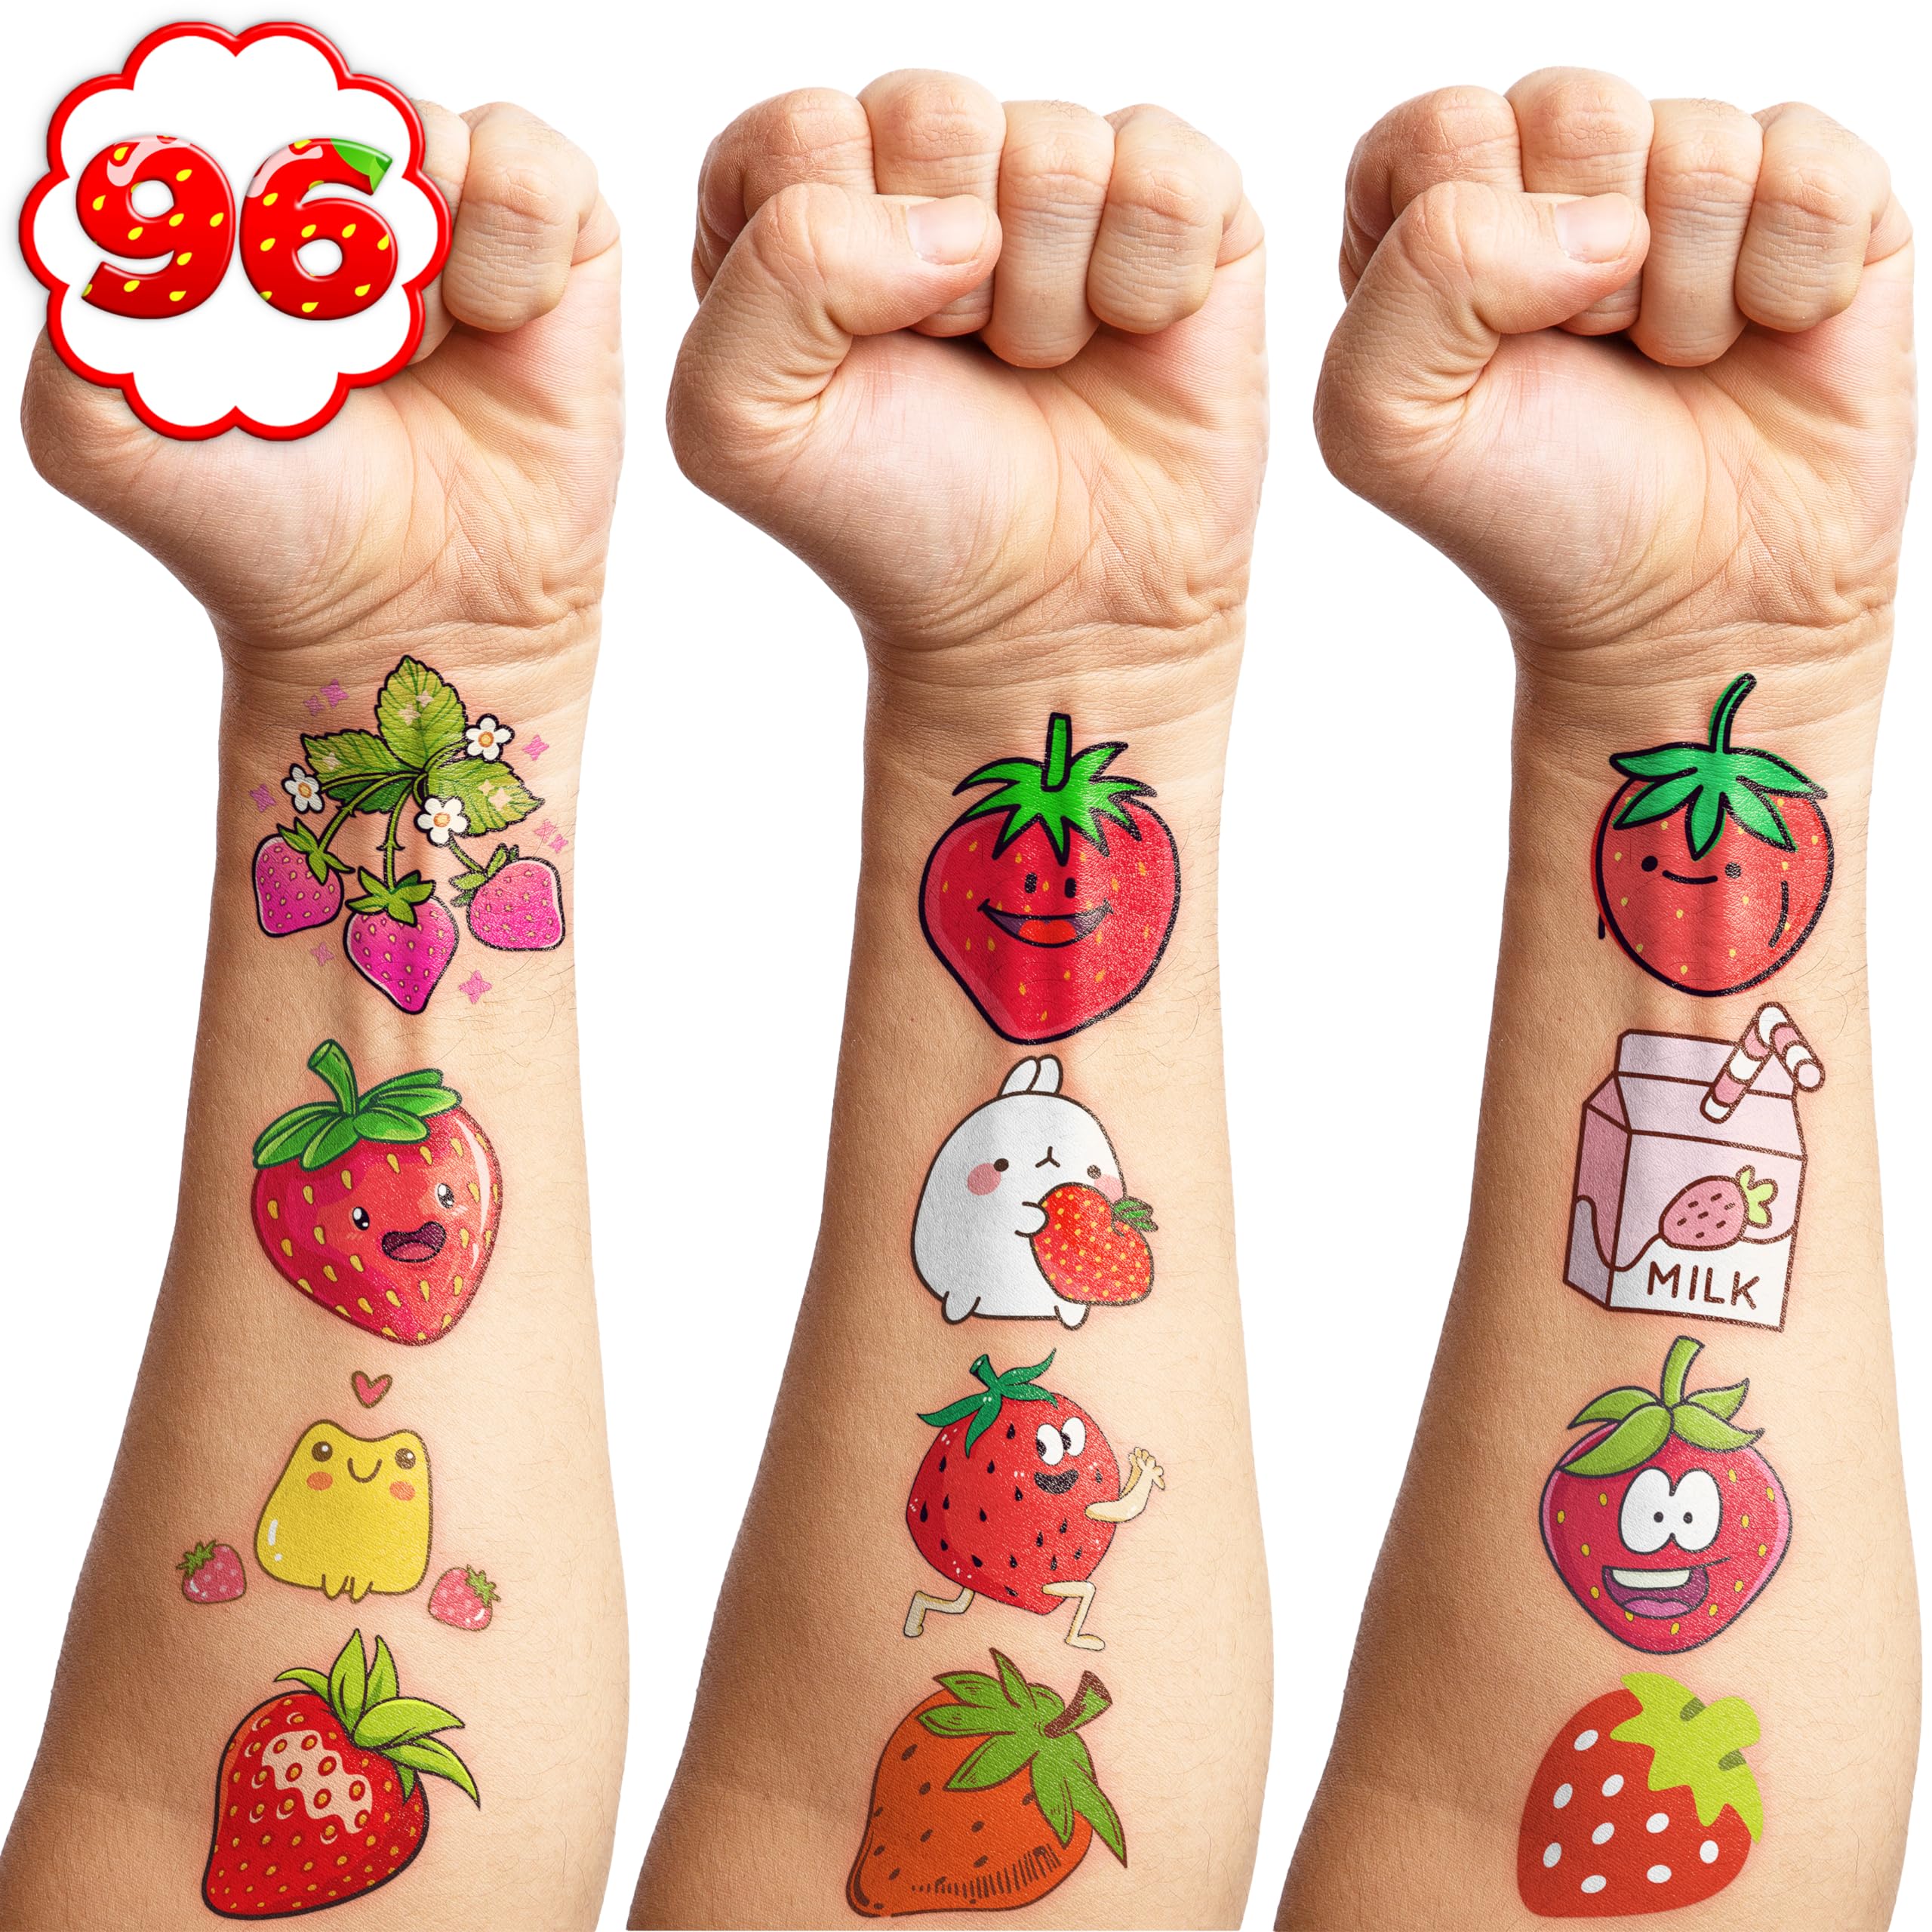 Strawberry Temporary Tattoos Berry First Birthday Party Supplies Decorations 96PCS Cute Tattoos Stickers Party Favors Kids Gifts Girls Boys Classroom School Prizes Themed